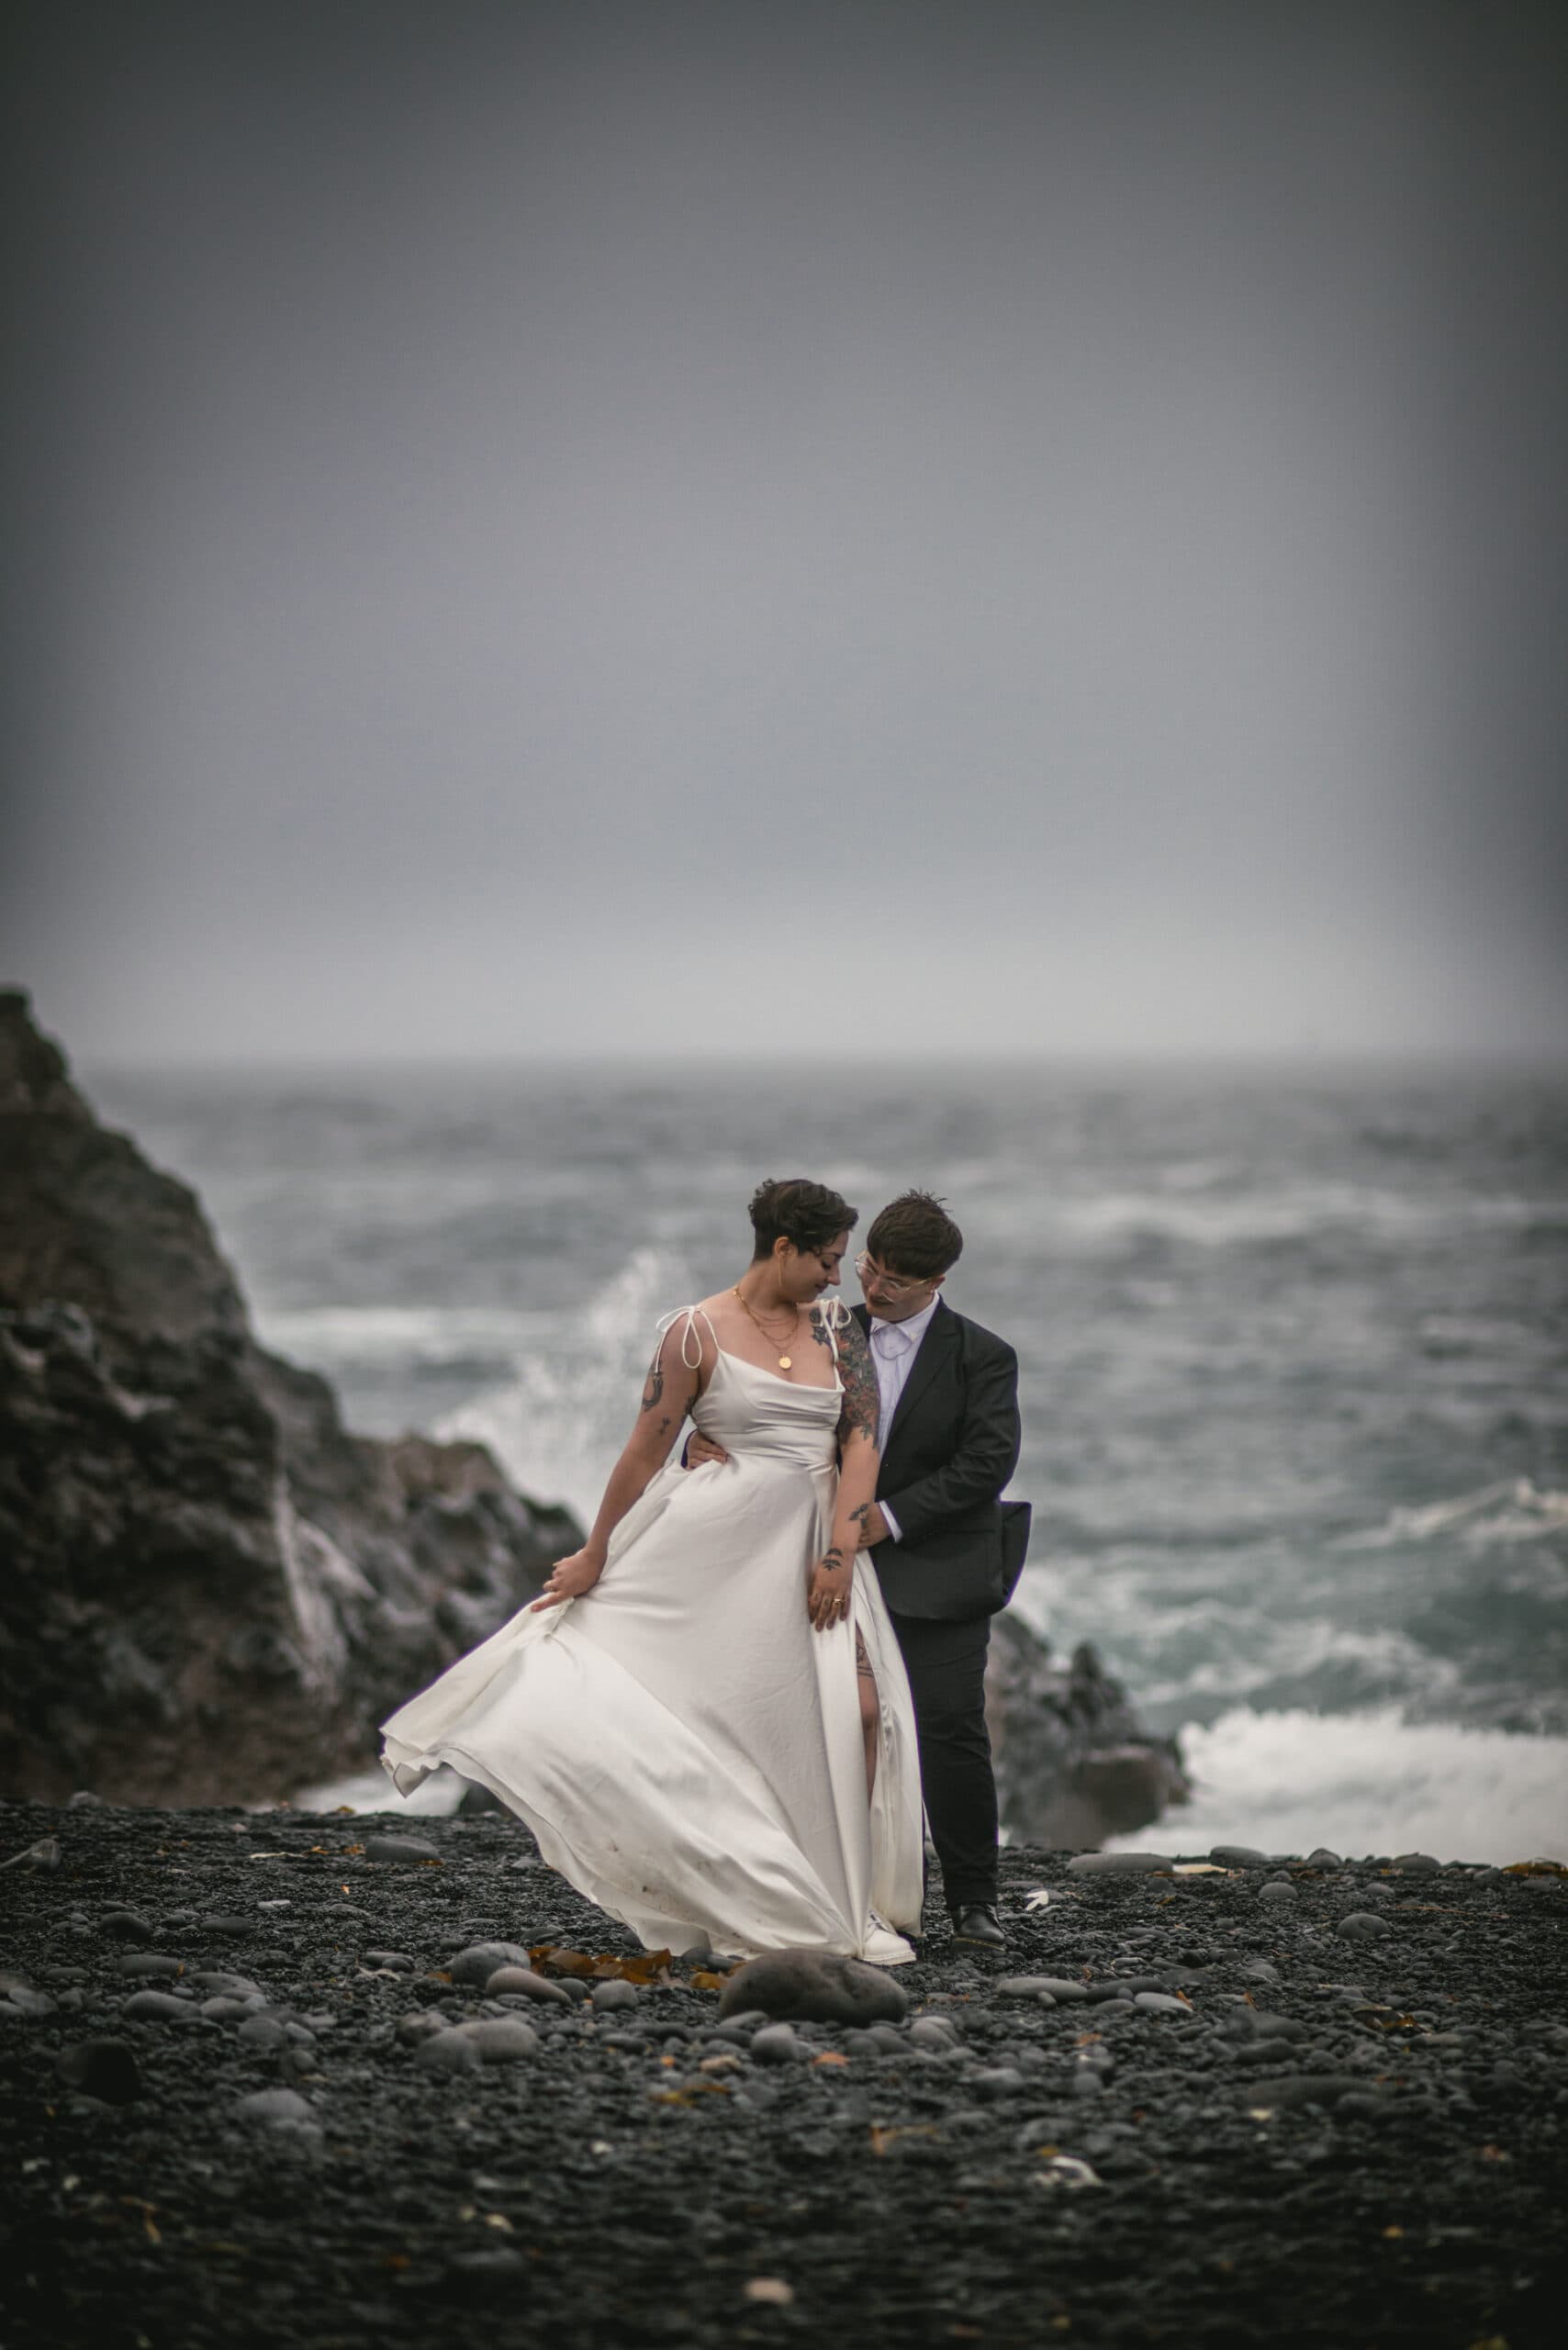 Two brides posing in front of the ocean with waves in the background on their elopement day in Iceland